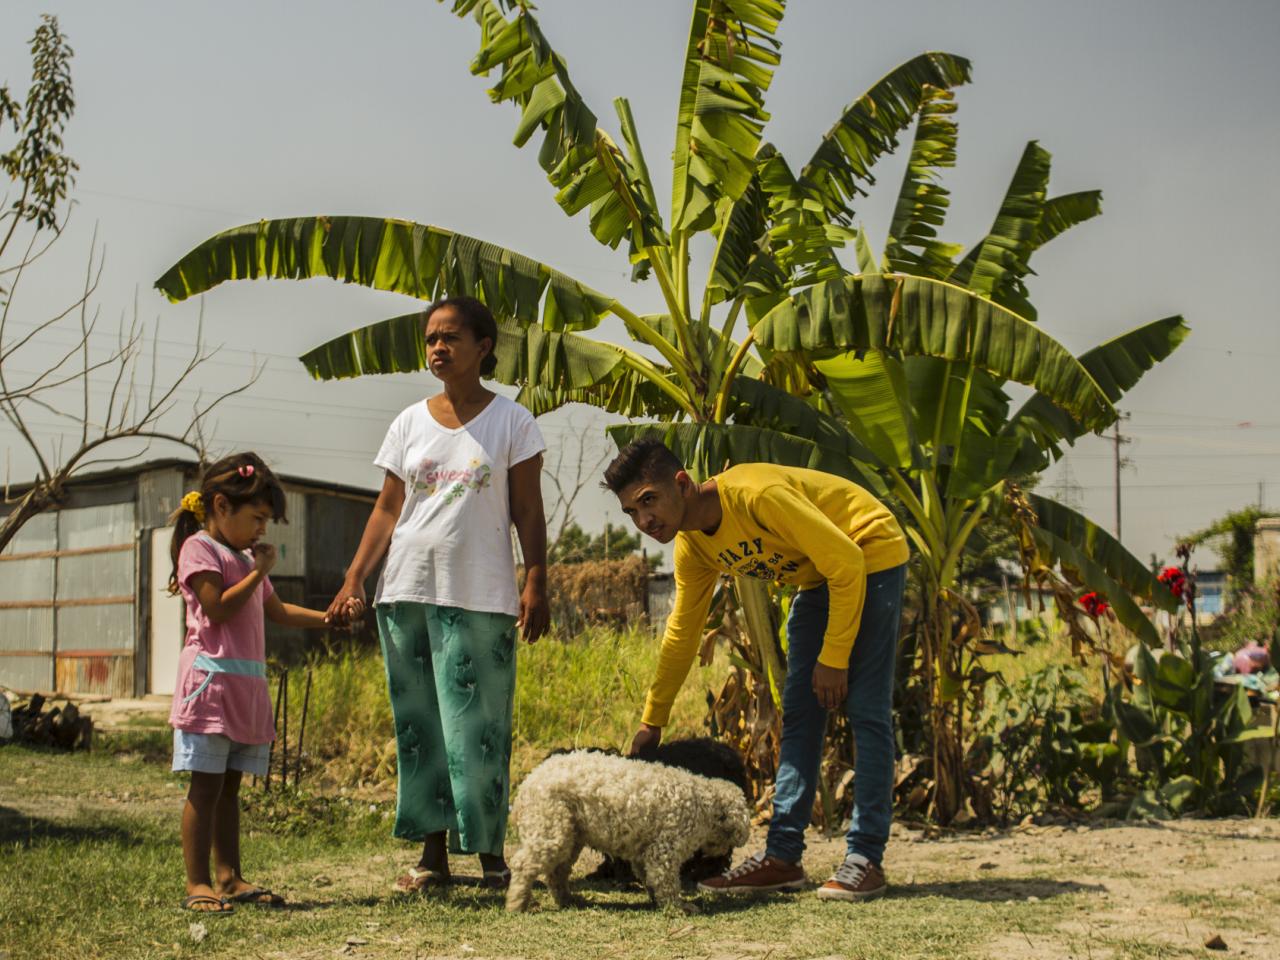 Production Still from Children of Las Brisas. Two adults and a child stand behind a tree in Venezuela. One bends to pet a small dog.